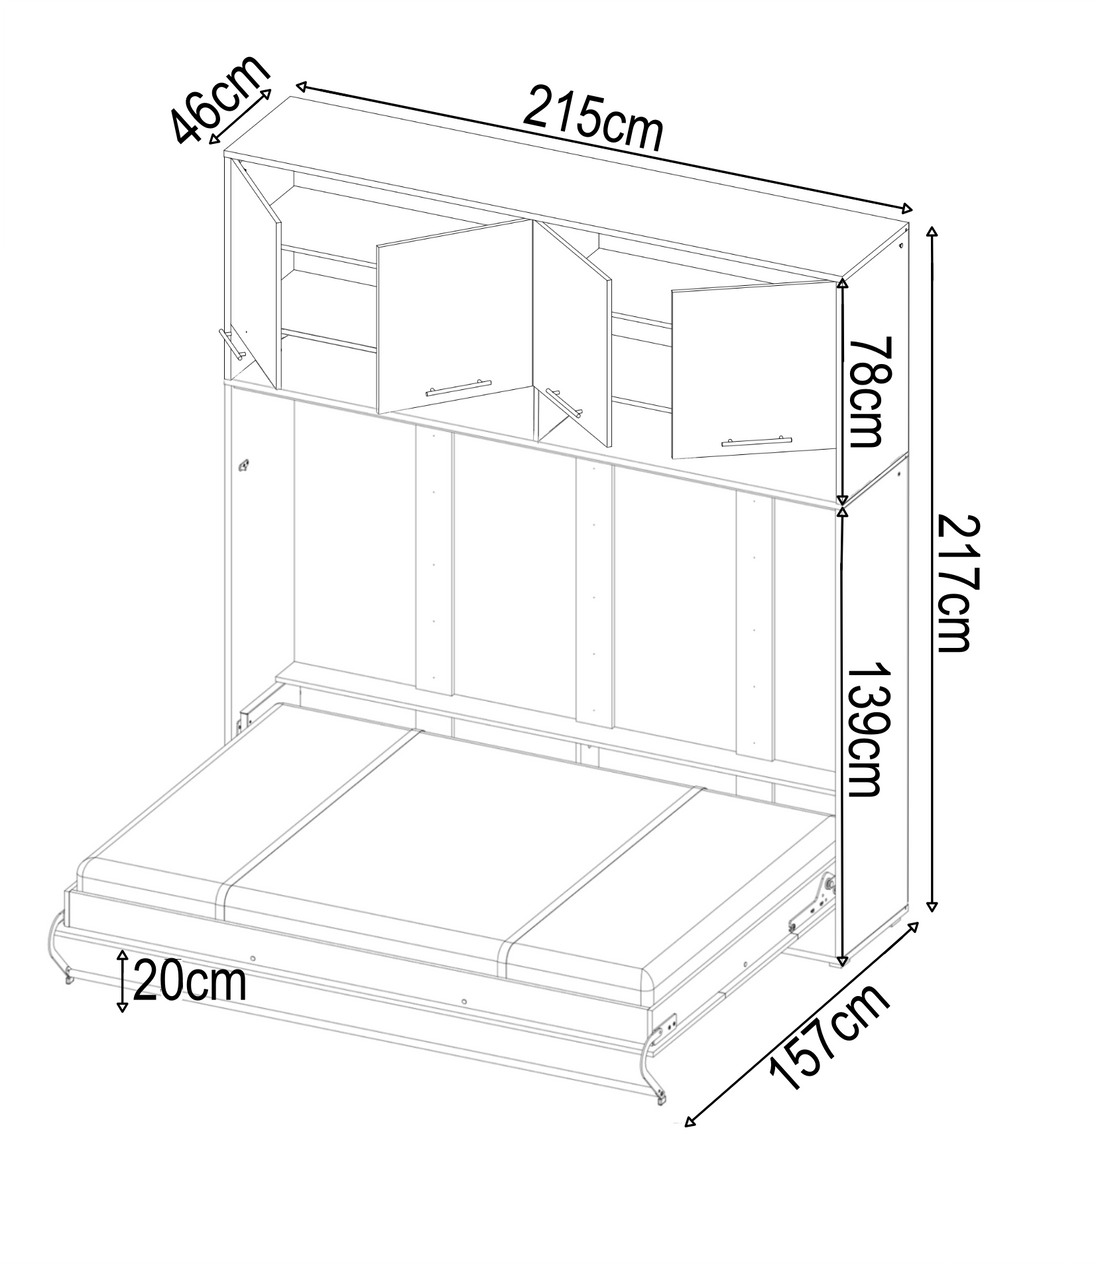 CP-05 Horizontal Wall Bed Concept 120cm with Over Bed Unit White Matt Wall Bed with Storage Unit 